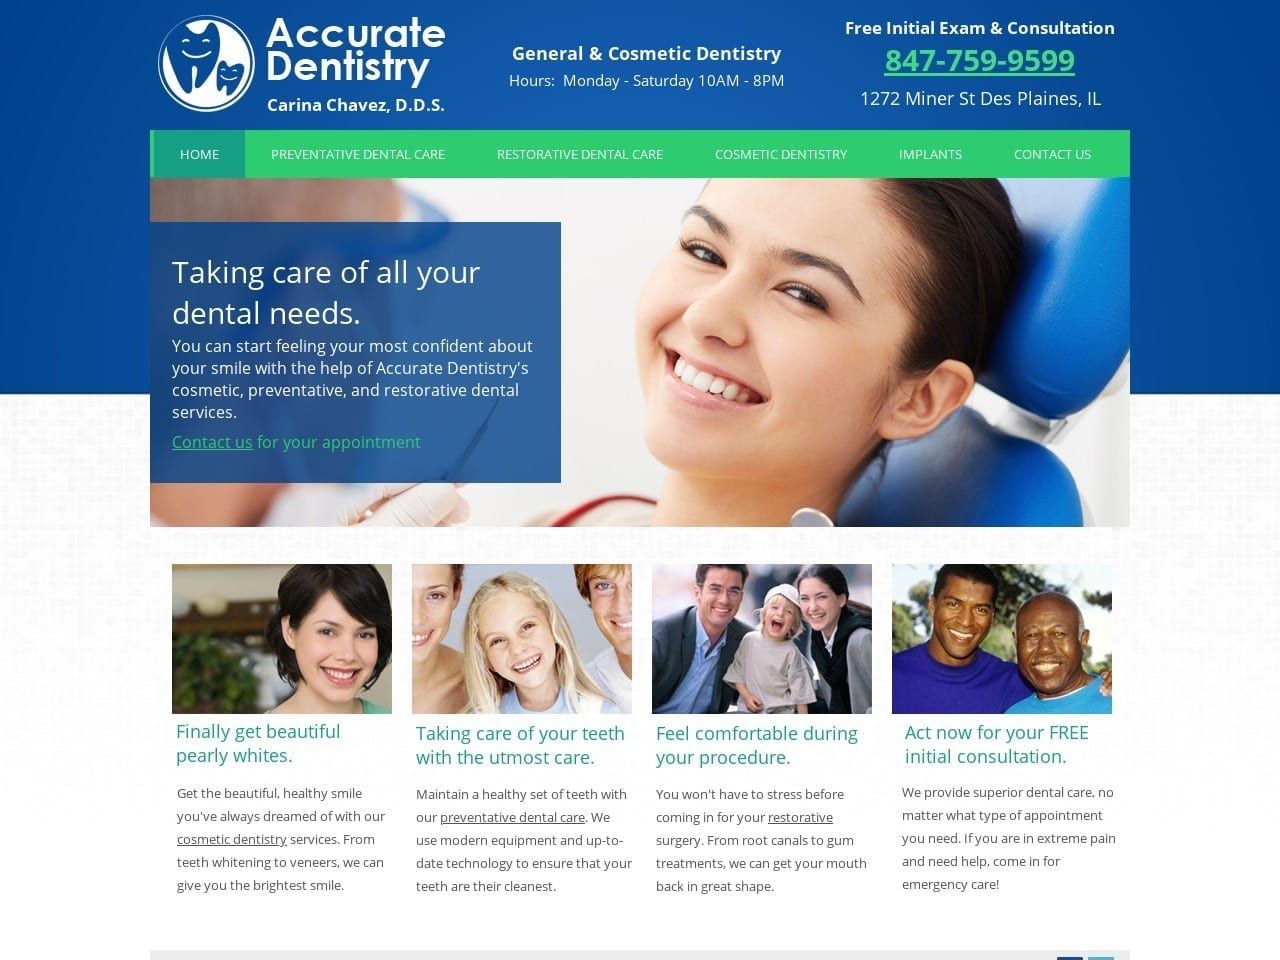 Accurate Dentist Website Screenshot from accuratedentistry.net